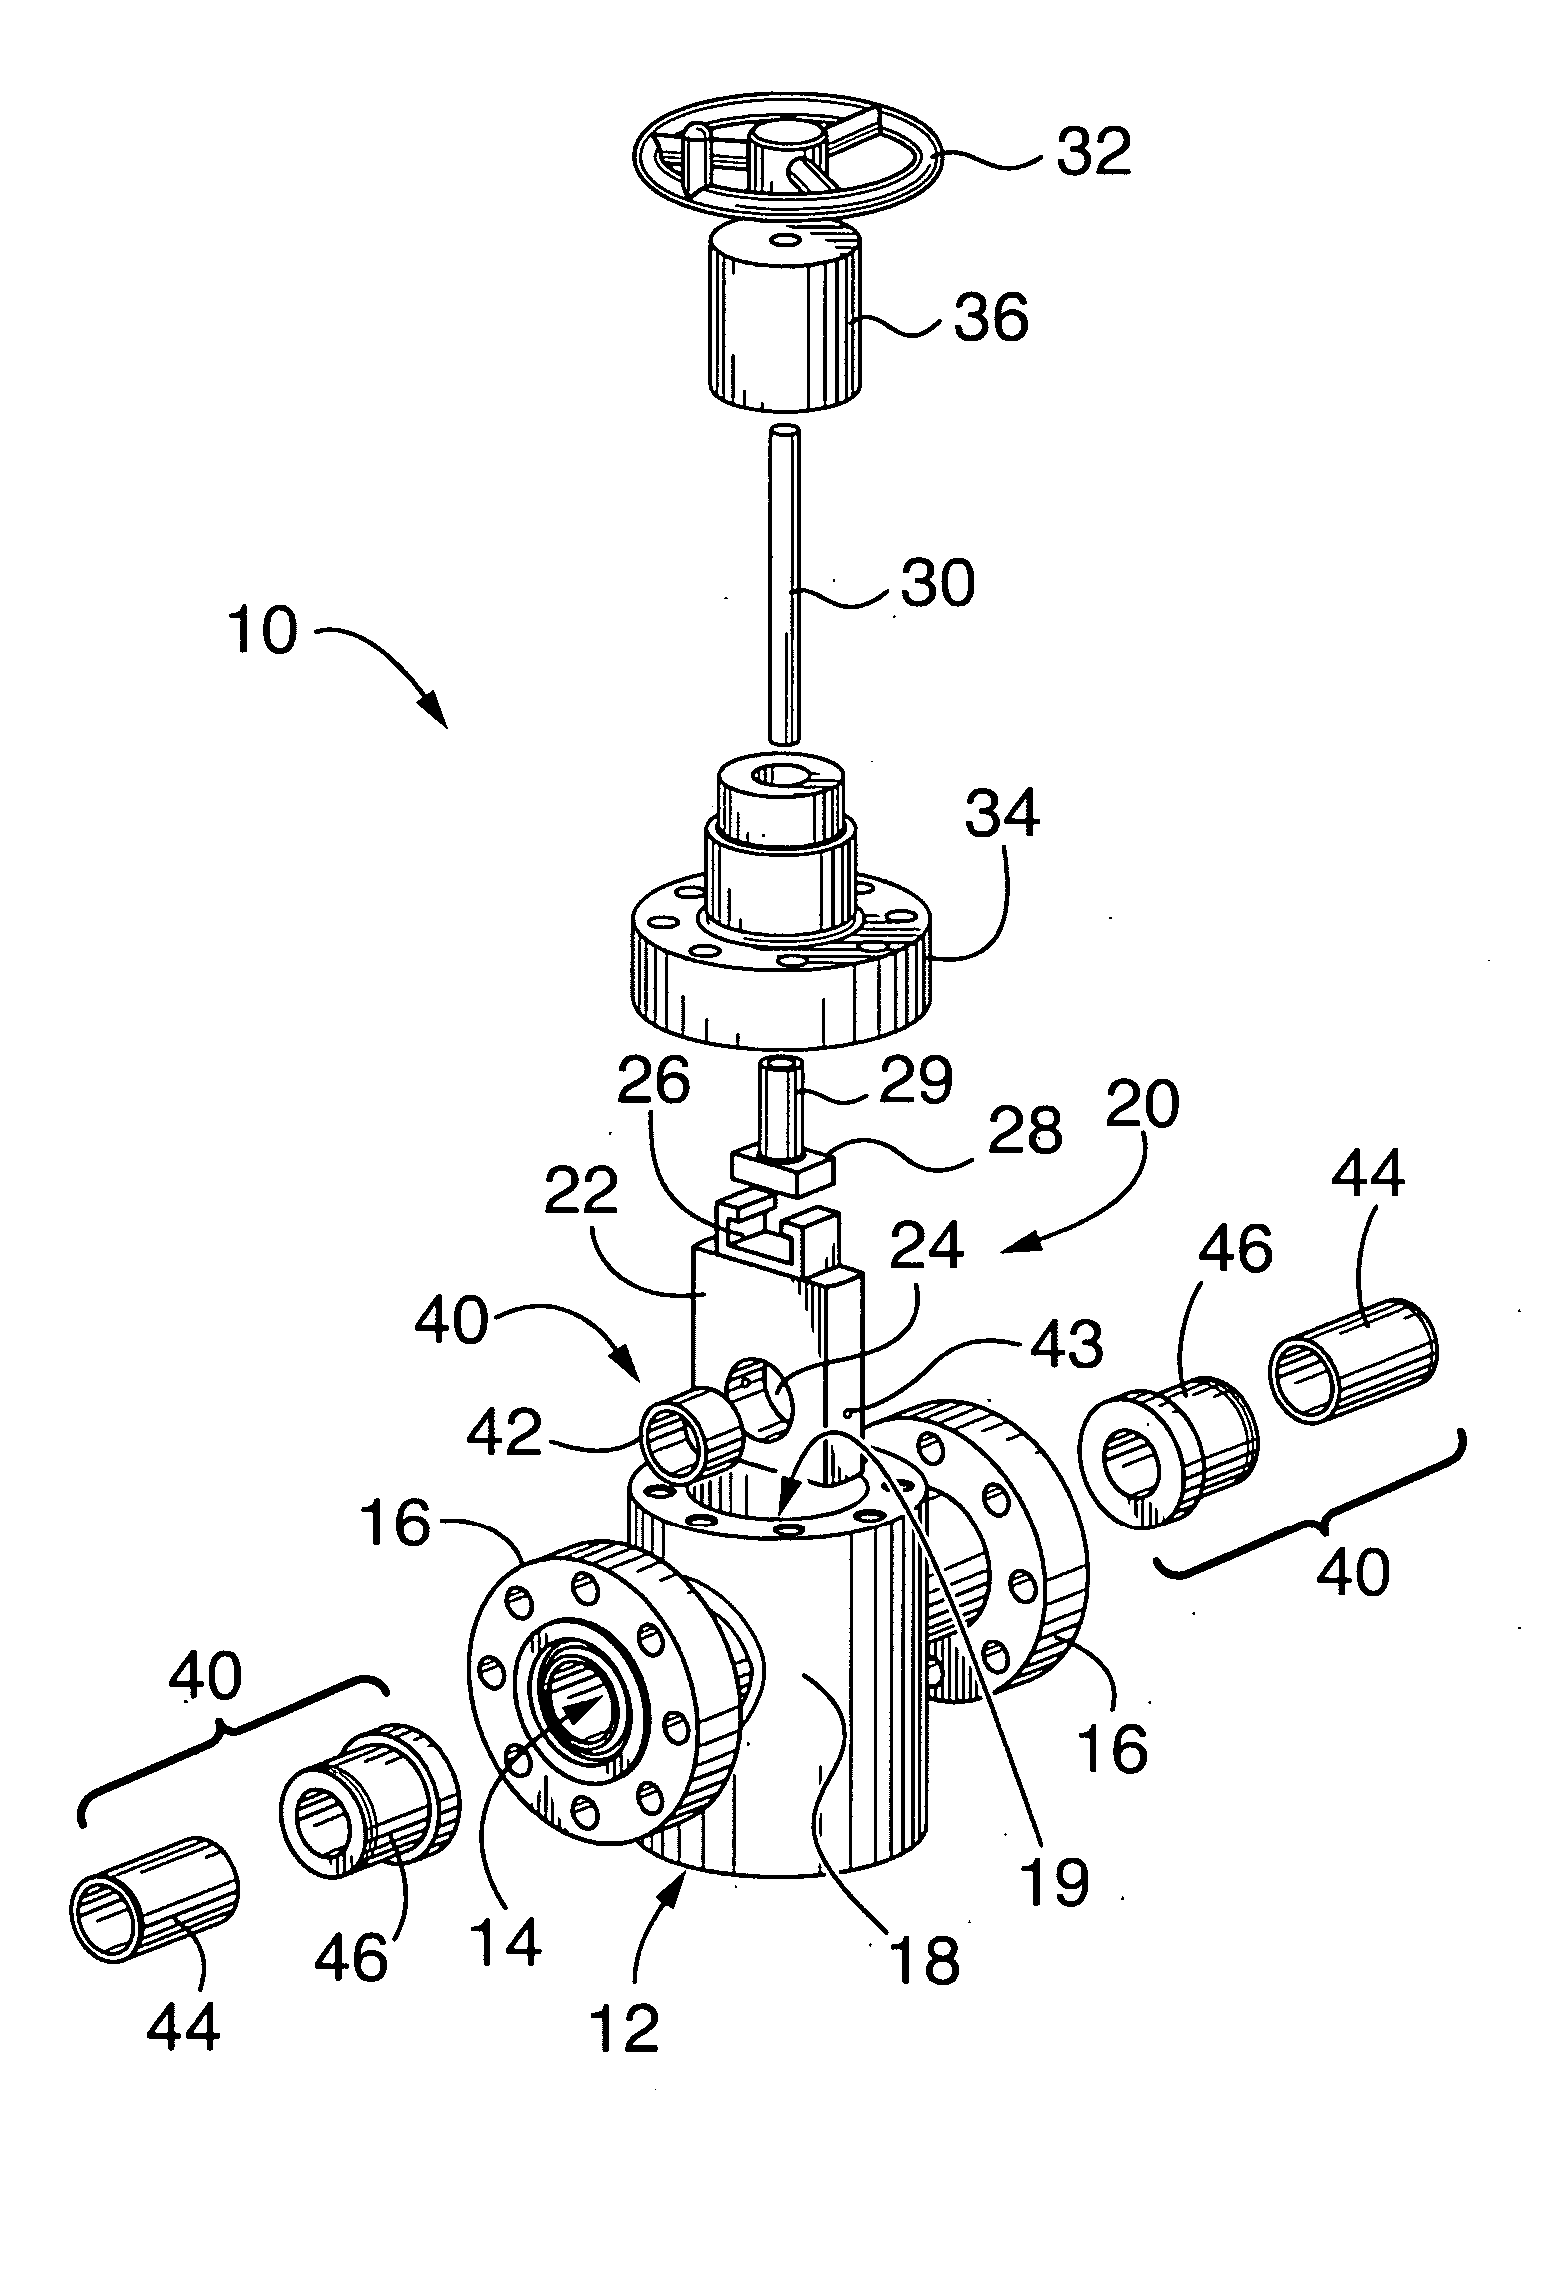 Gate valve with replaceable inserts and method of refurbishing same